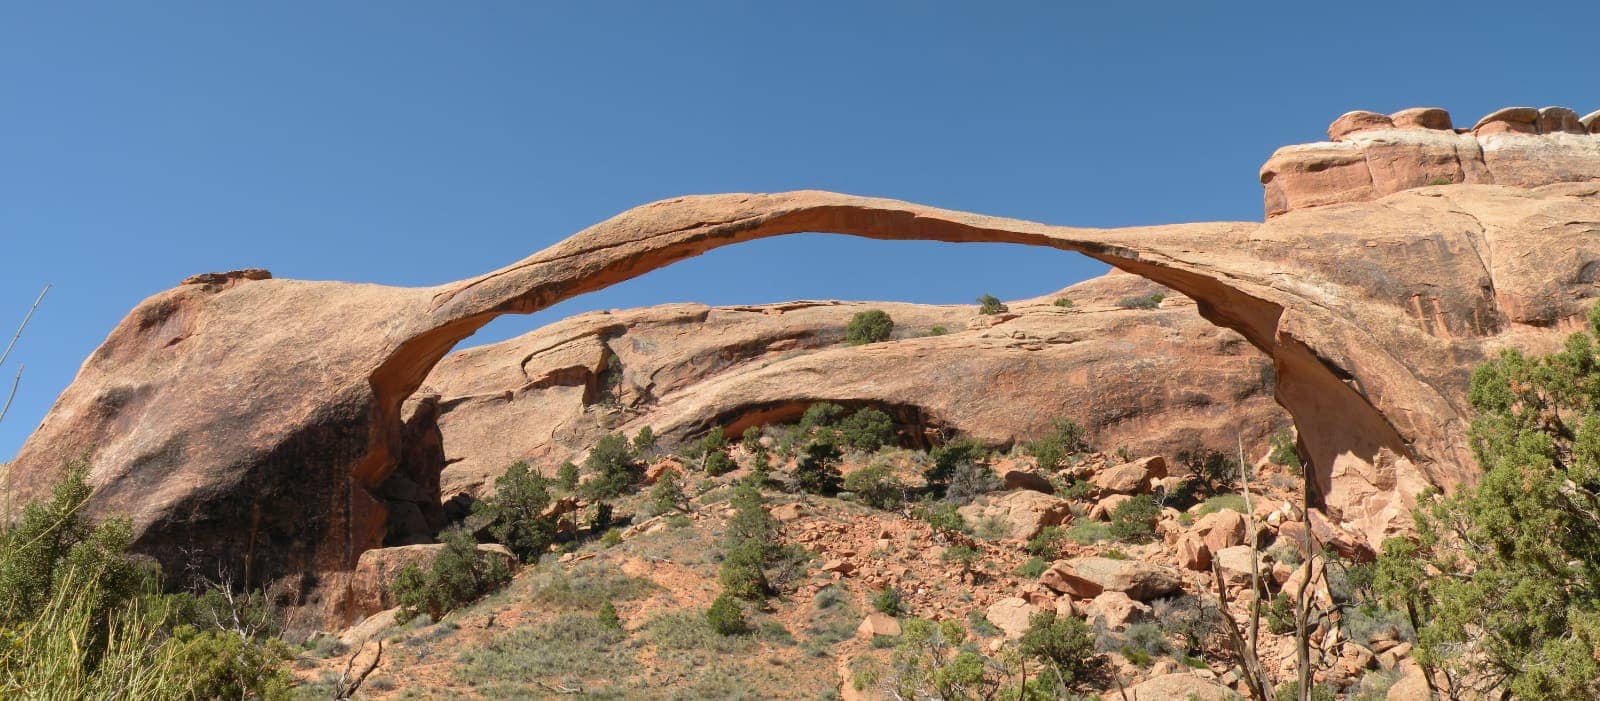 Thin rock arch with blue sky in background